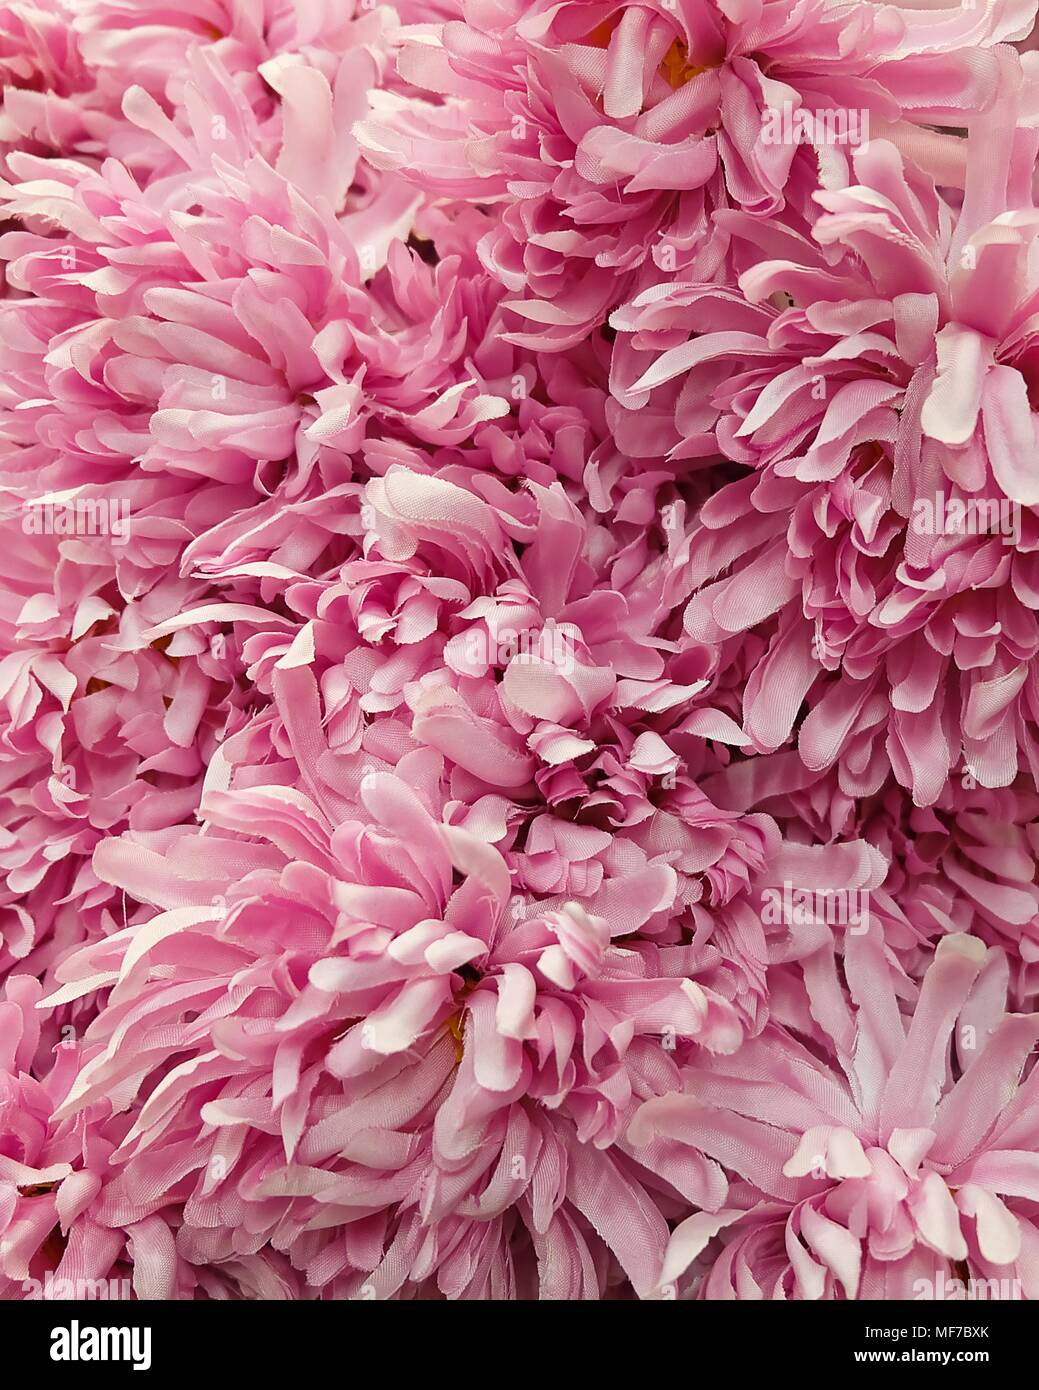 Background of Artificial Pink Chrysanthemum Flowers for Home and Building Decoration. Stock Photo